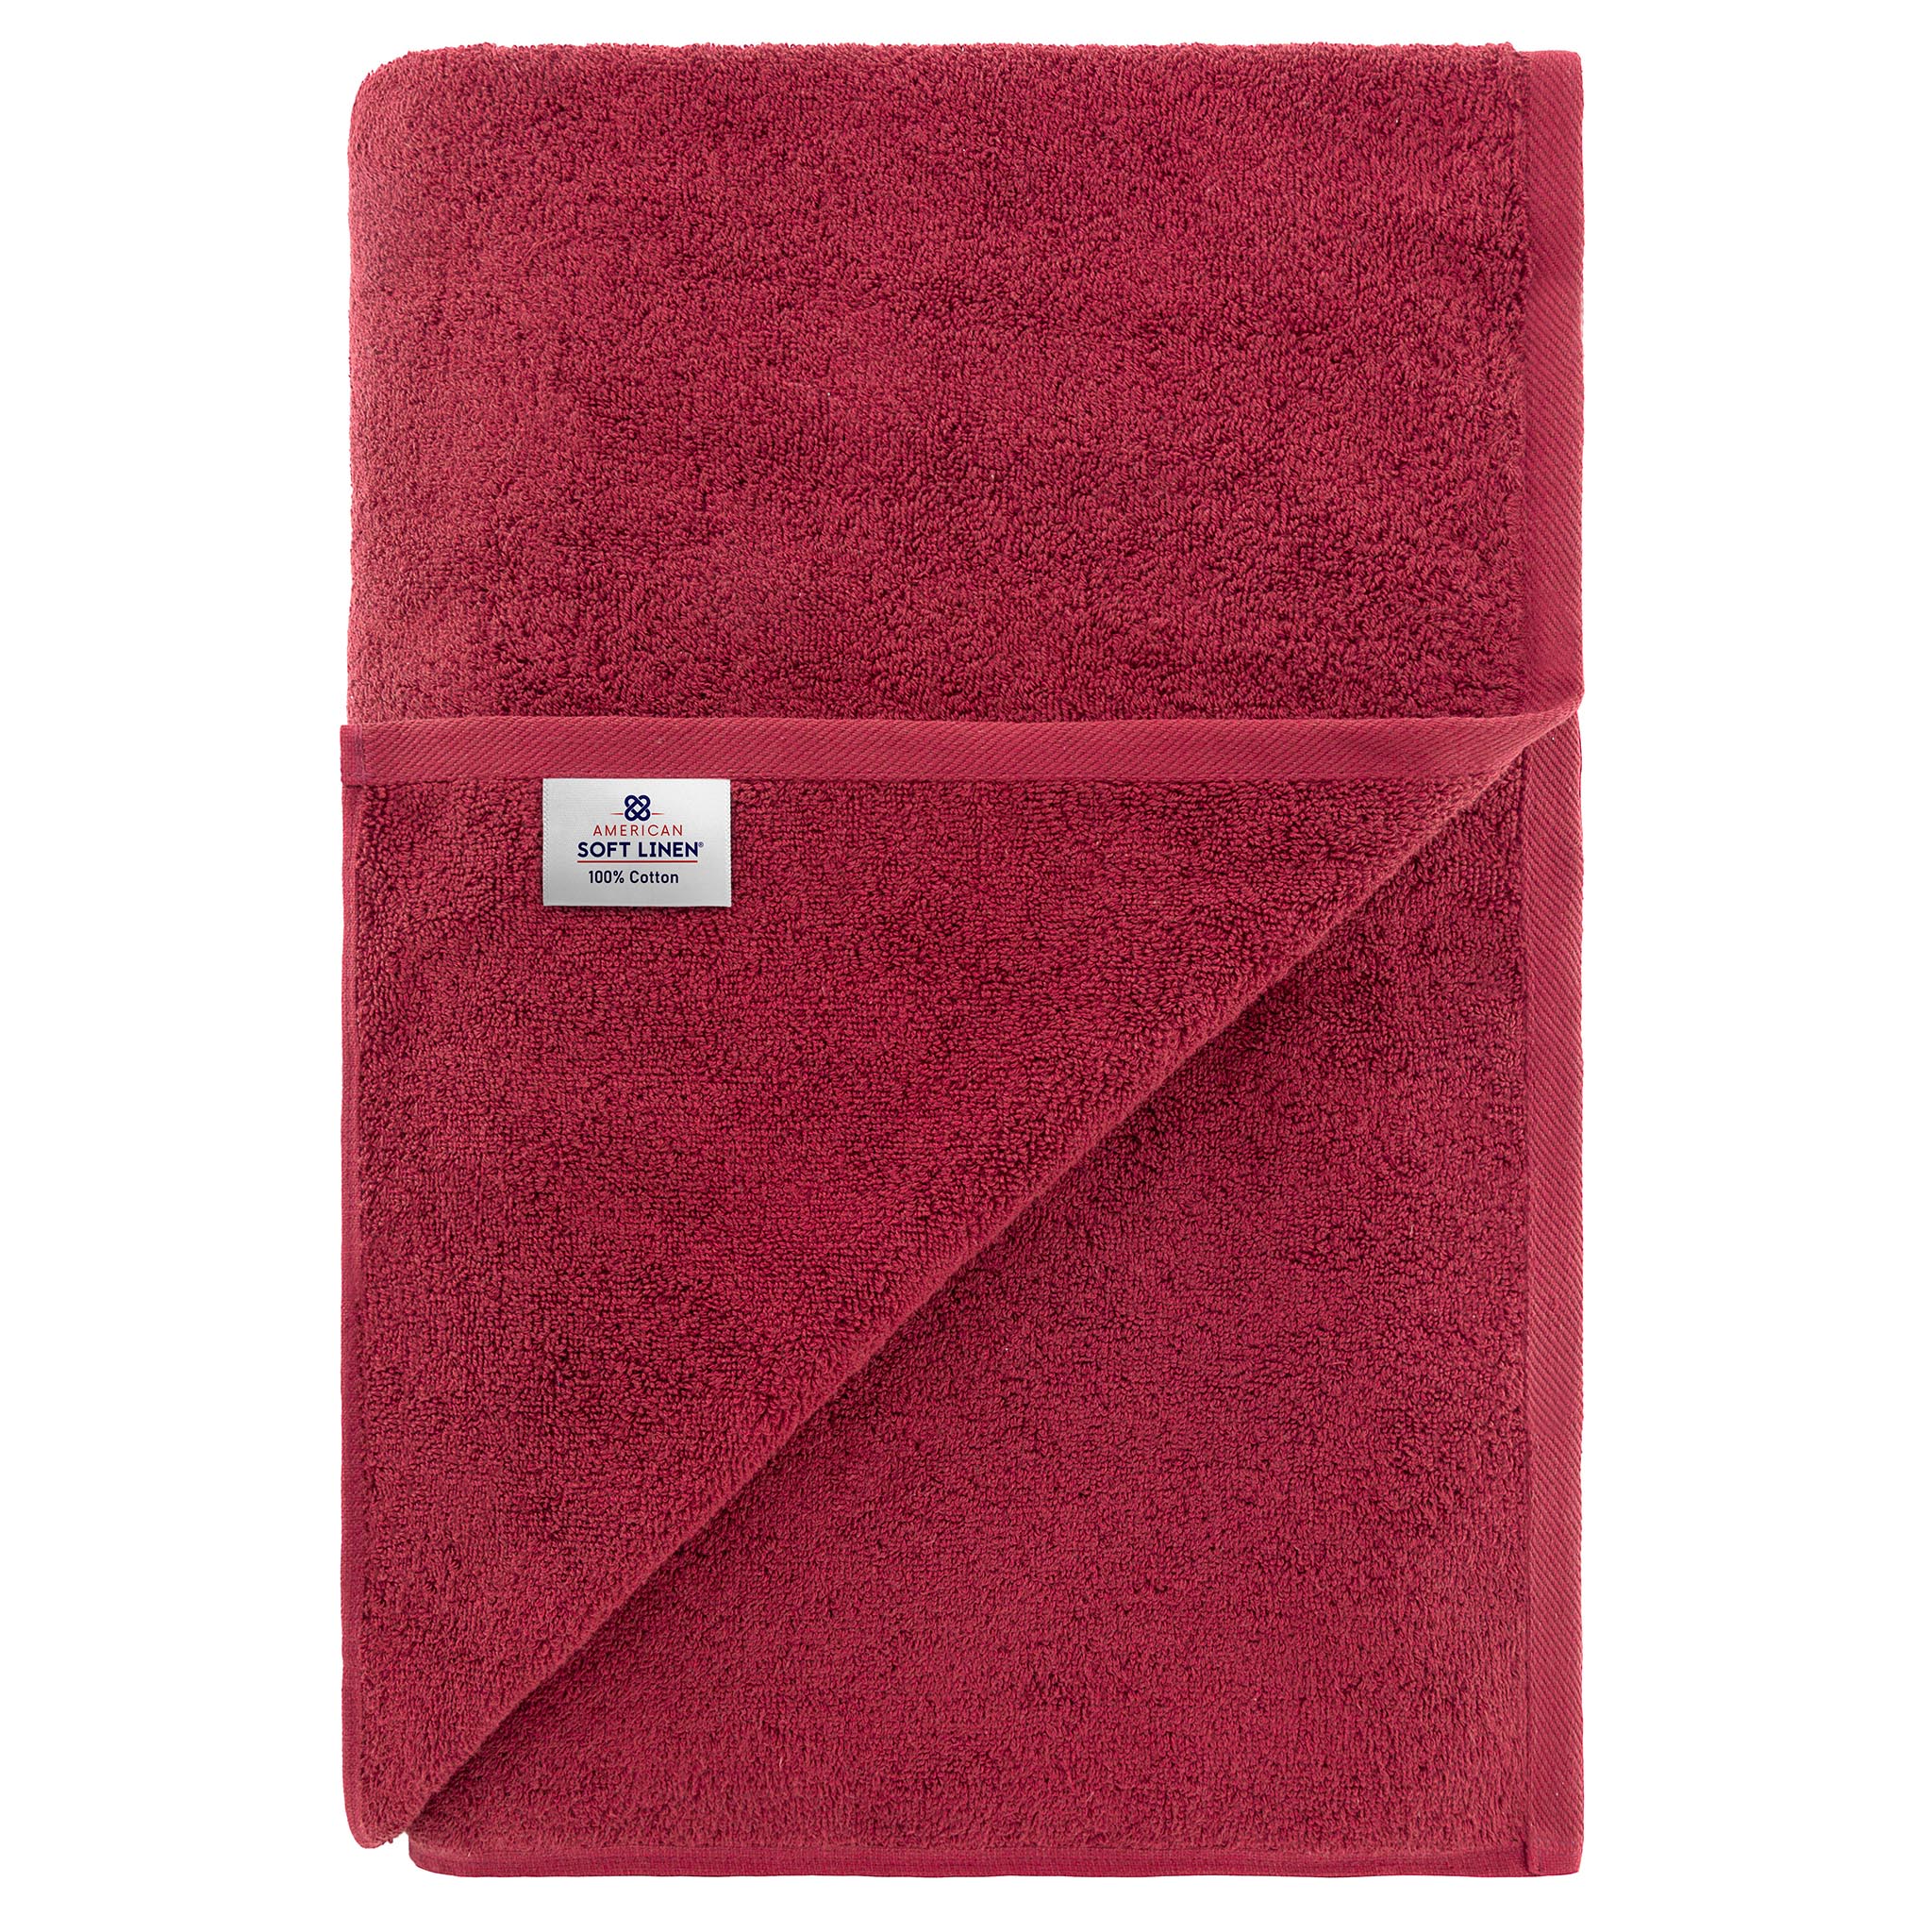 American Soft Linen 100% Ring Spun Cotton 40x80 Inches Oversized Bath Sheets bordeaux-red-7